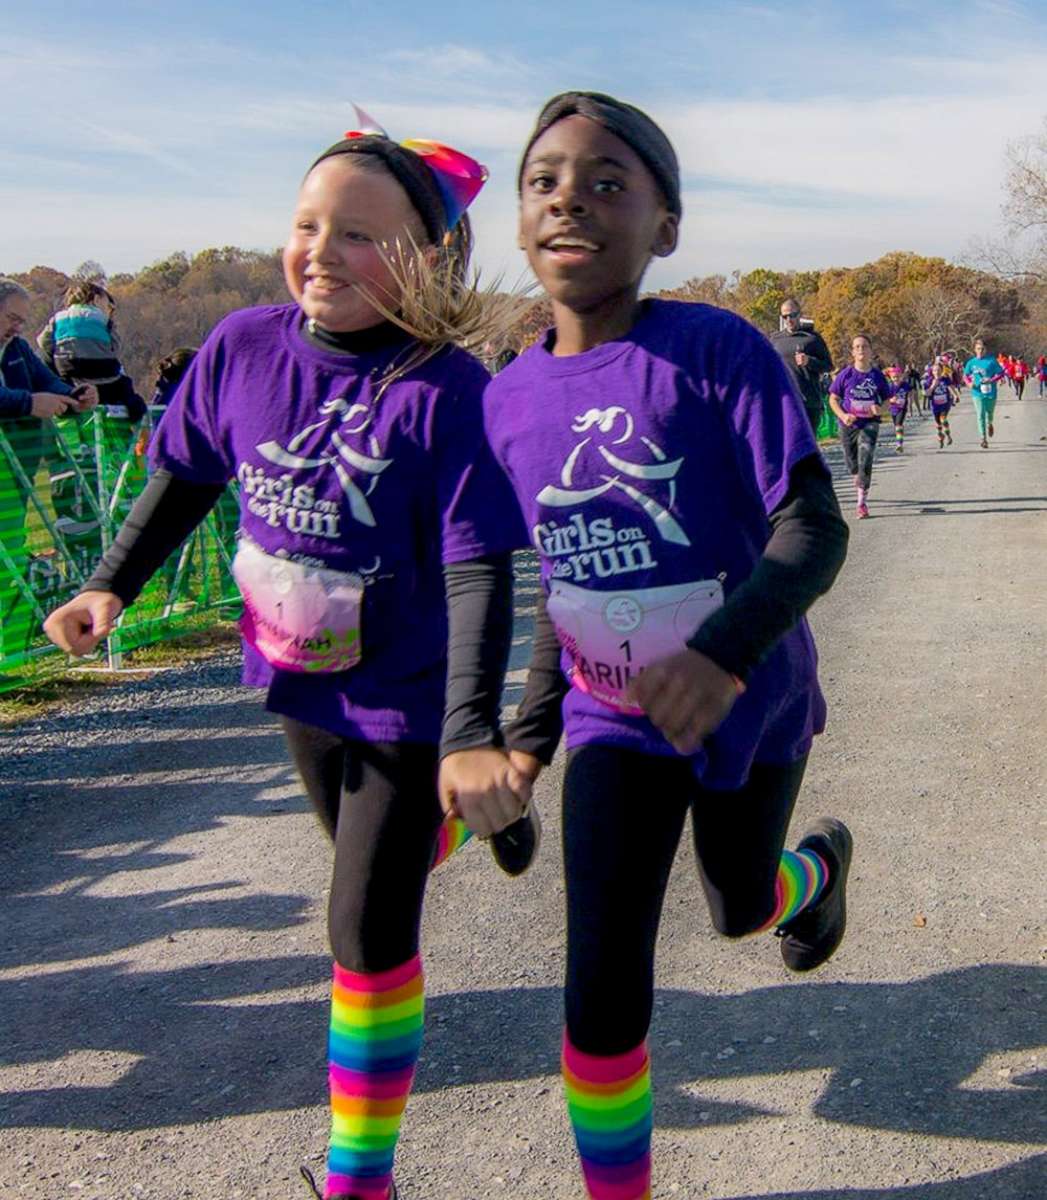 PHOTO: Young girls race in the Girls on the Run 5K at Sweet Briar College in central Virginia. On Nov. 18, 2017, nearly 20,000 girls ran in 5K races in 25 U.S. cities.